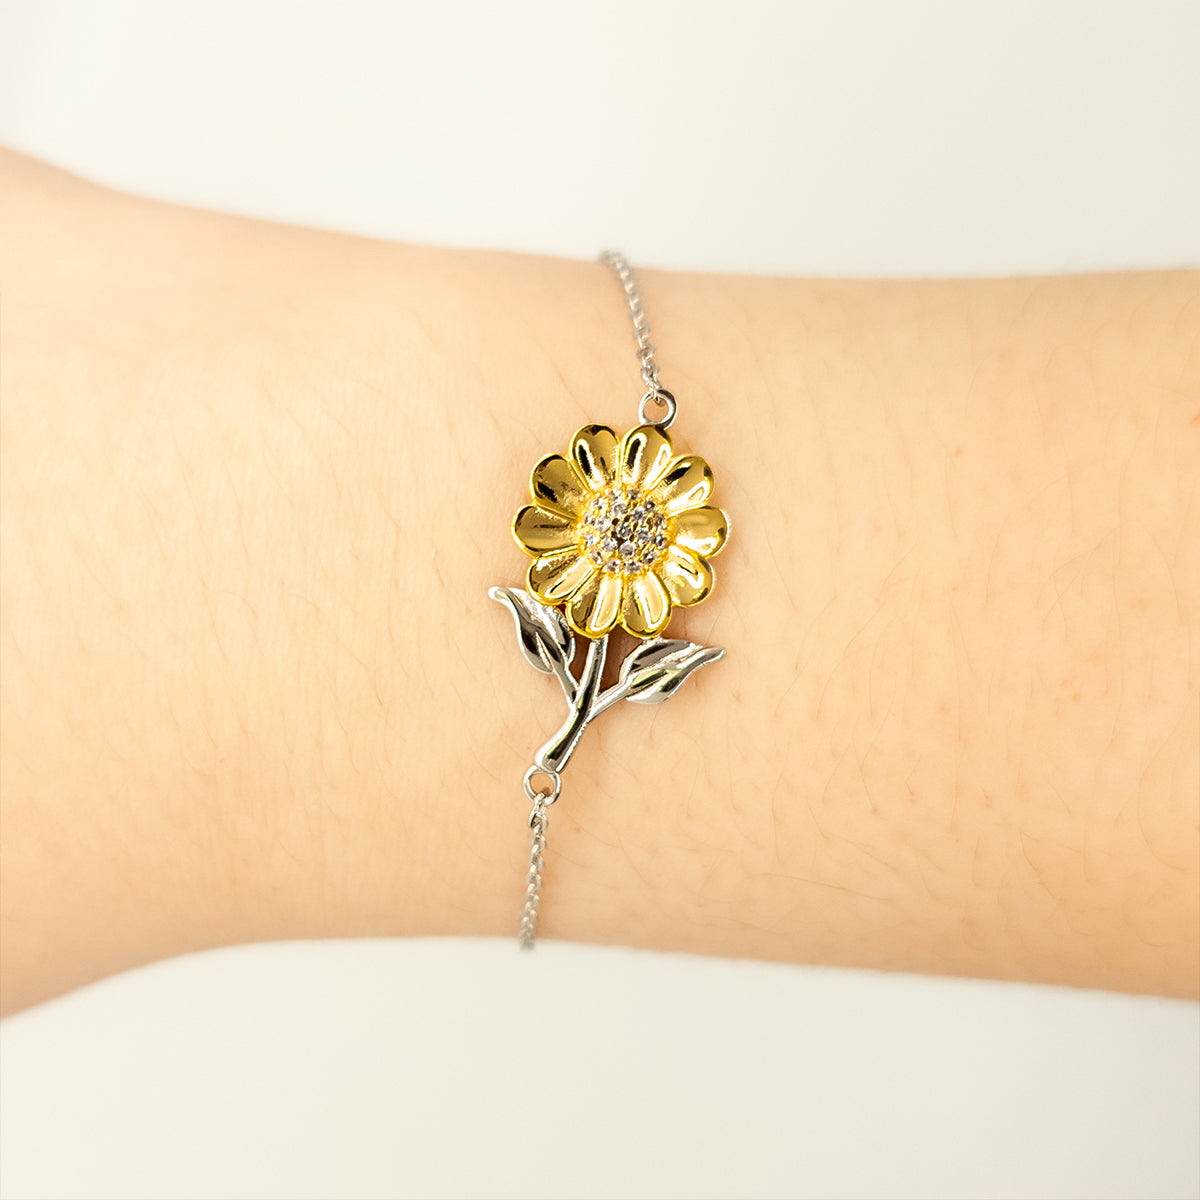 Engraved Sunflower Bracelet for Grandma - You Will Always Have a Special Place in My Heart - Mothers Day Gift for Her - Unique, Inspirational Jewelry to Show Love and Appreciation in a Special Way